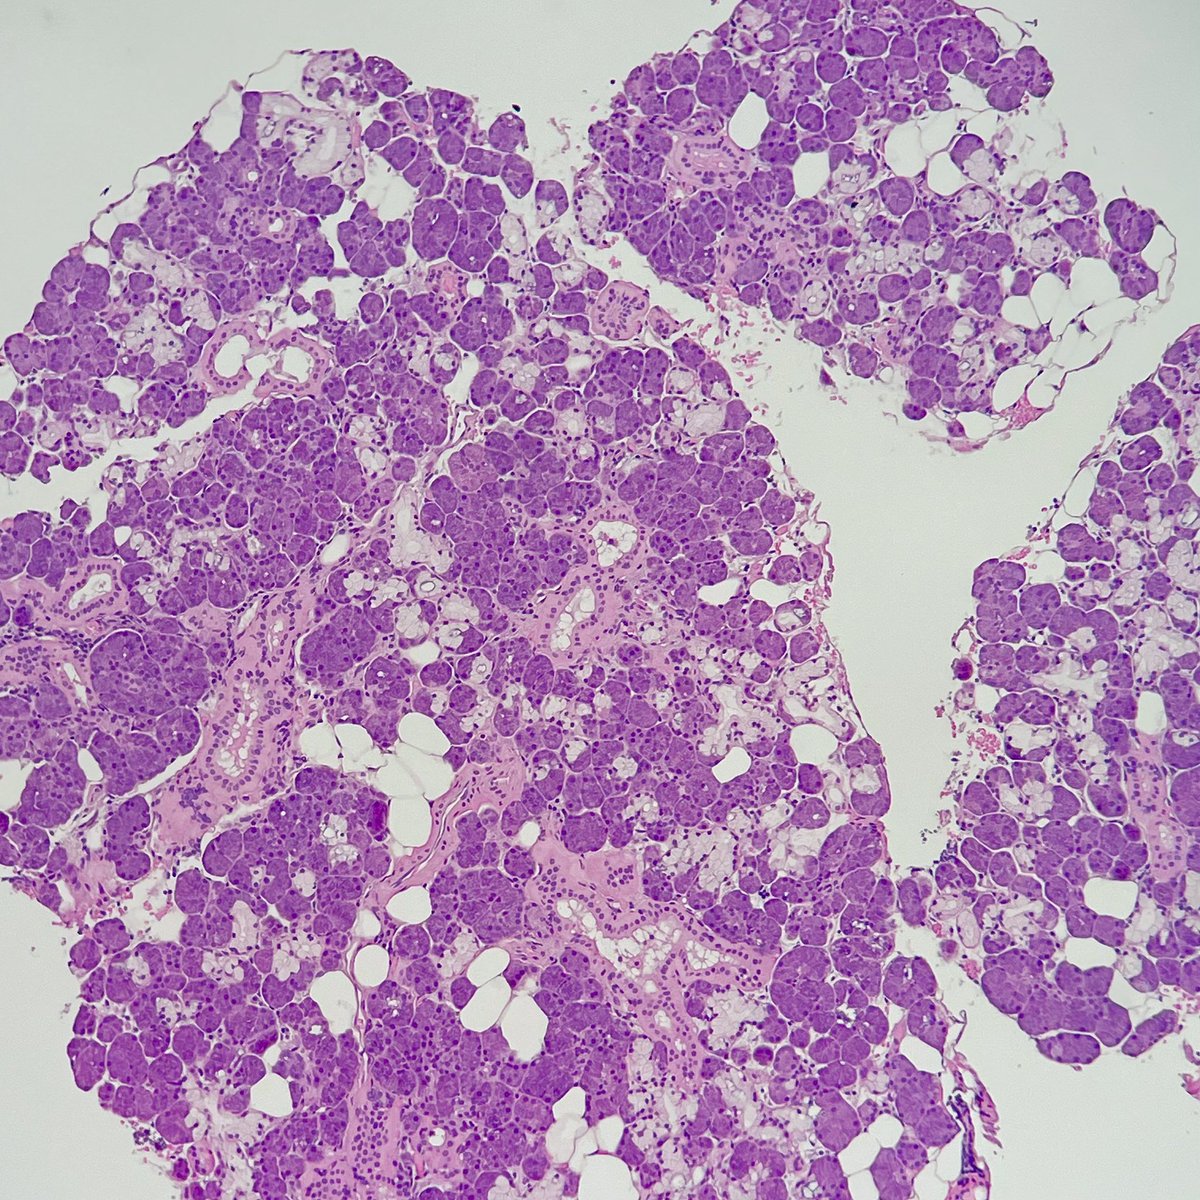 Biopsy from posterior mandible The clinician is worried about metastatic malignancy This is what you under the microscope, what is your diagnosis?